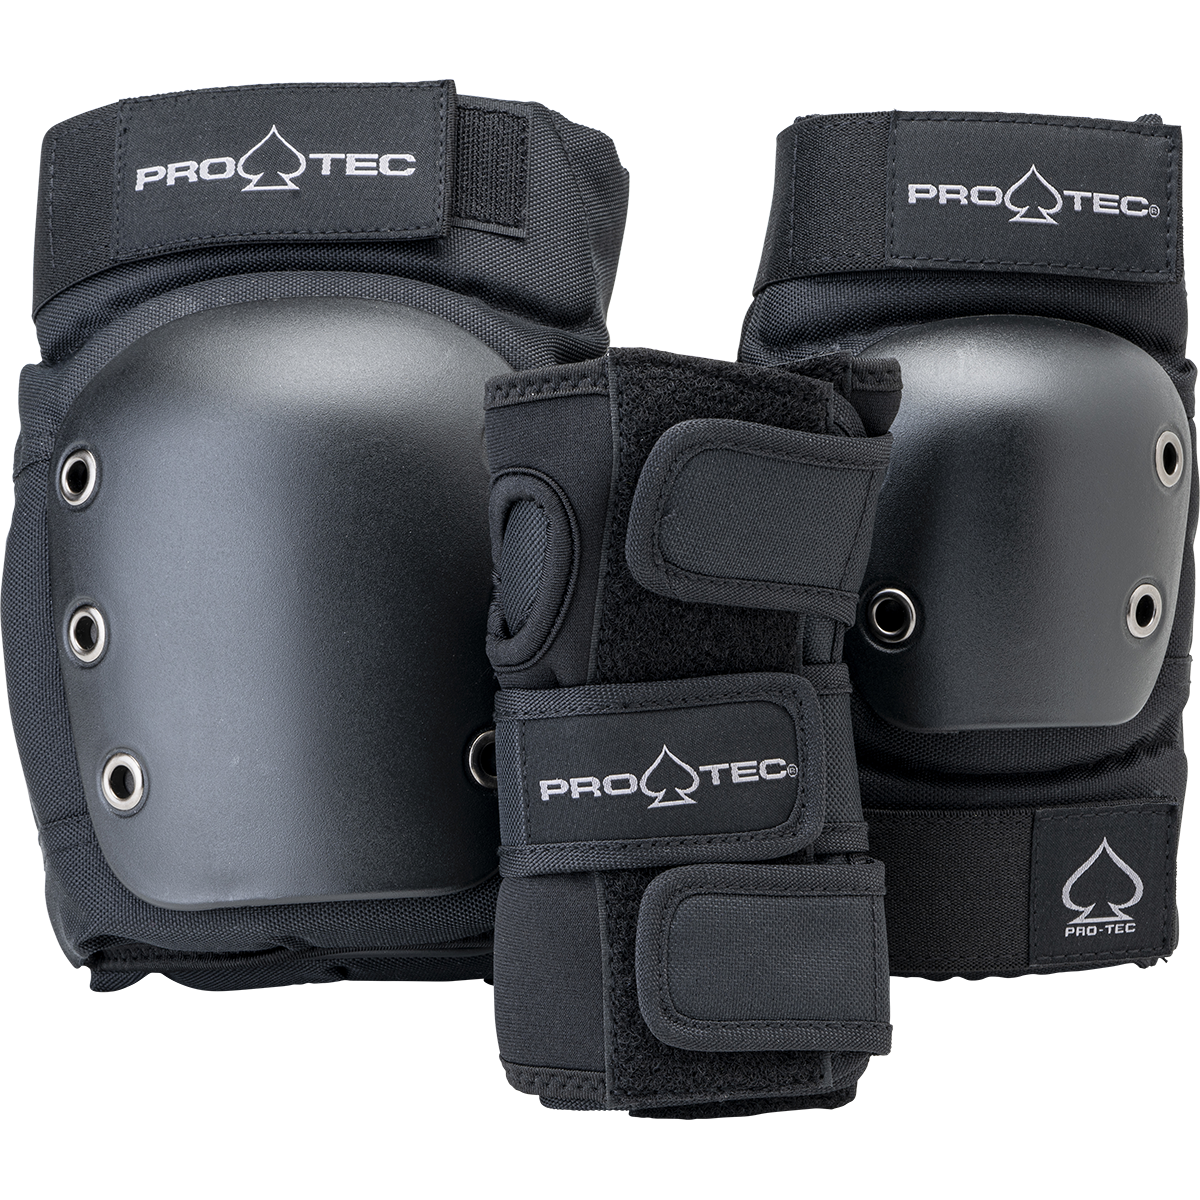 JR. Street Gear 3 Pack Closed Back - Youth